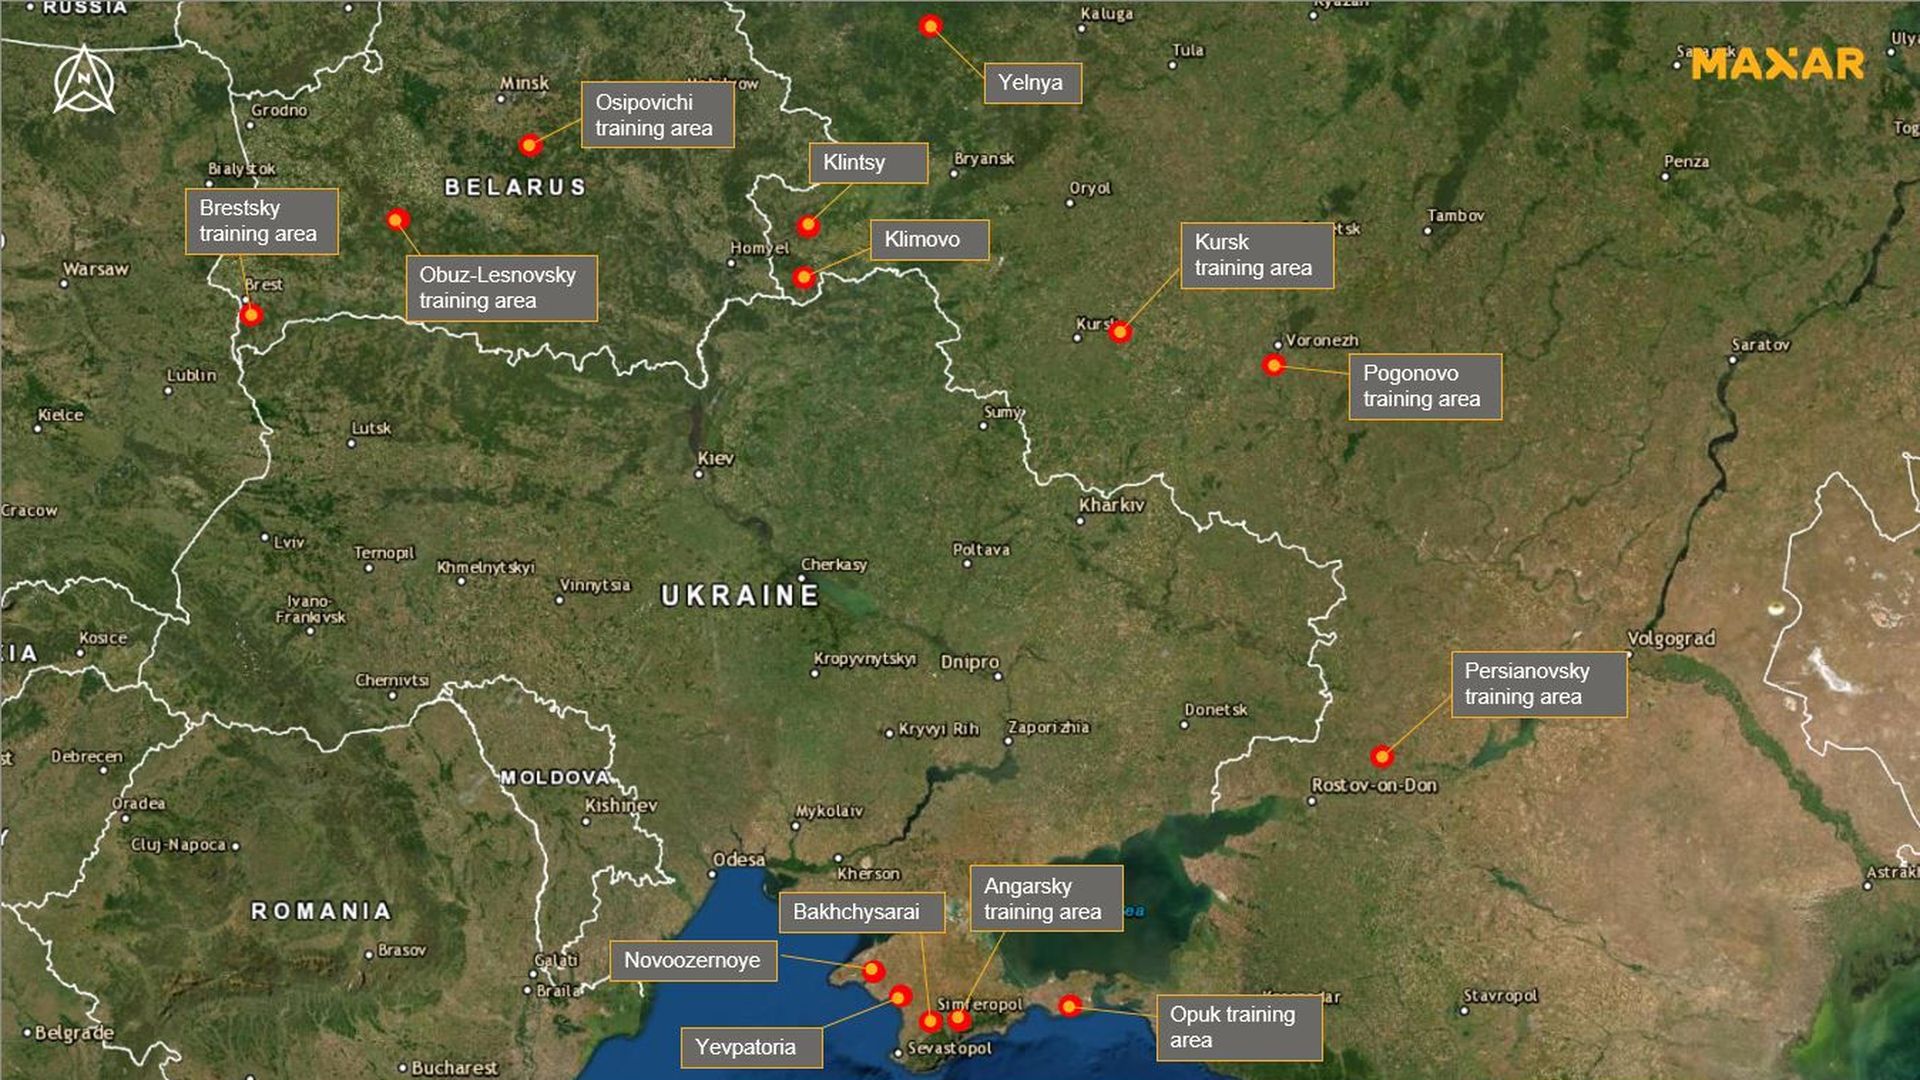 Map showing where Russia has staged troops and military equipment near Ukraine's border.